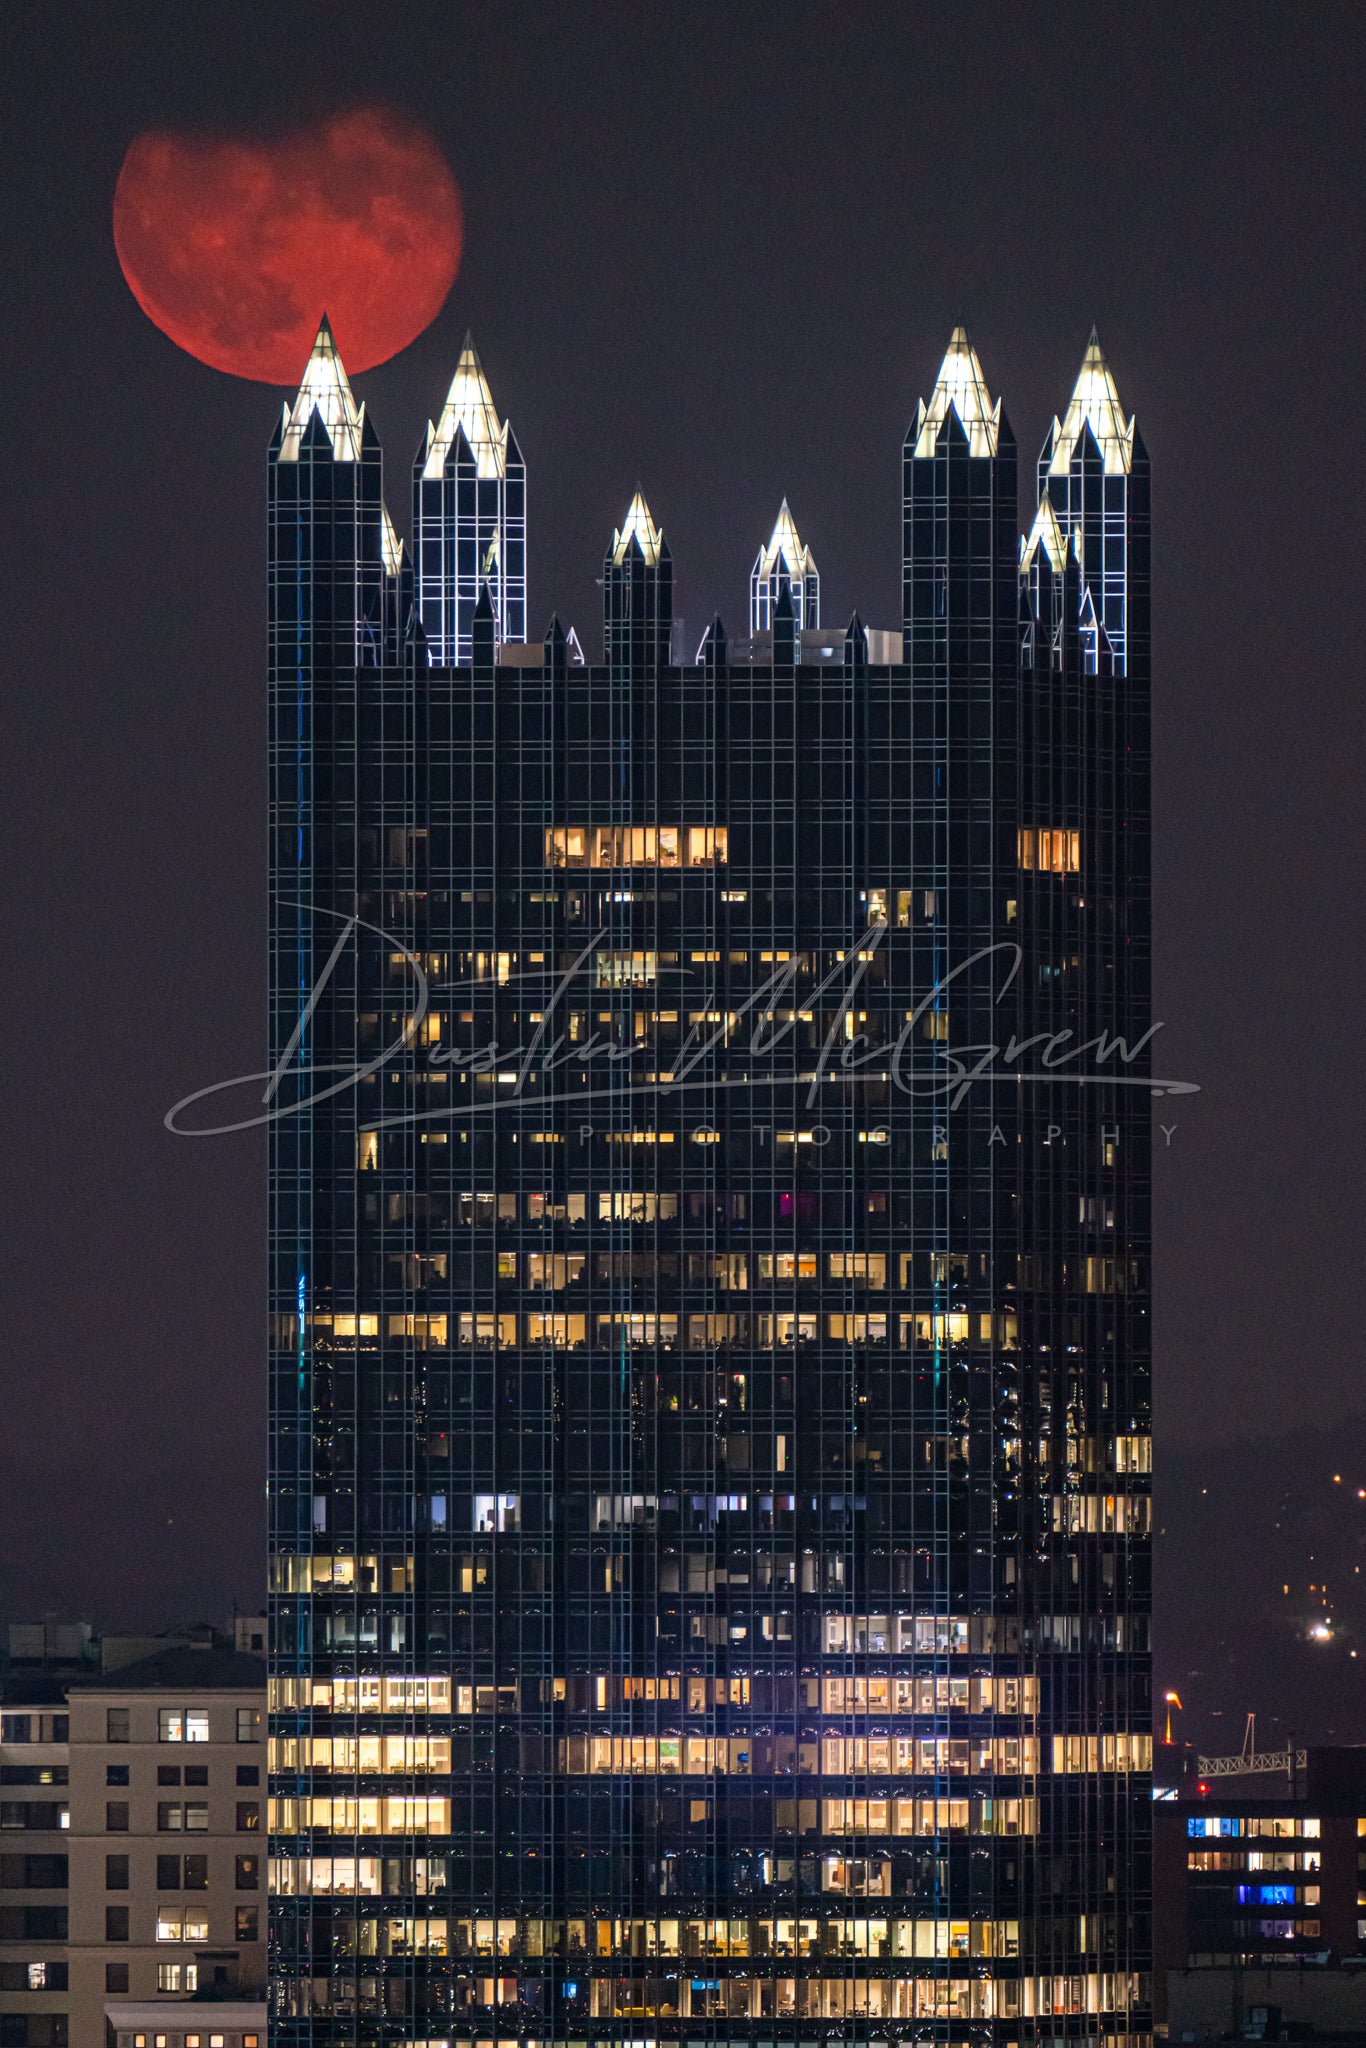 The Moon and PPG Place